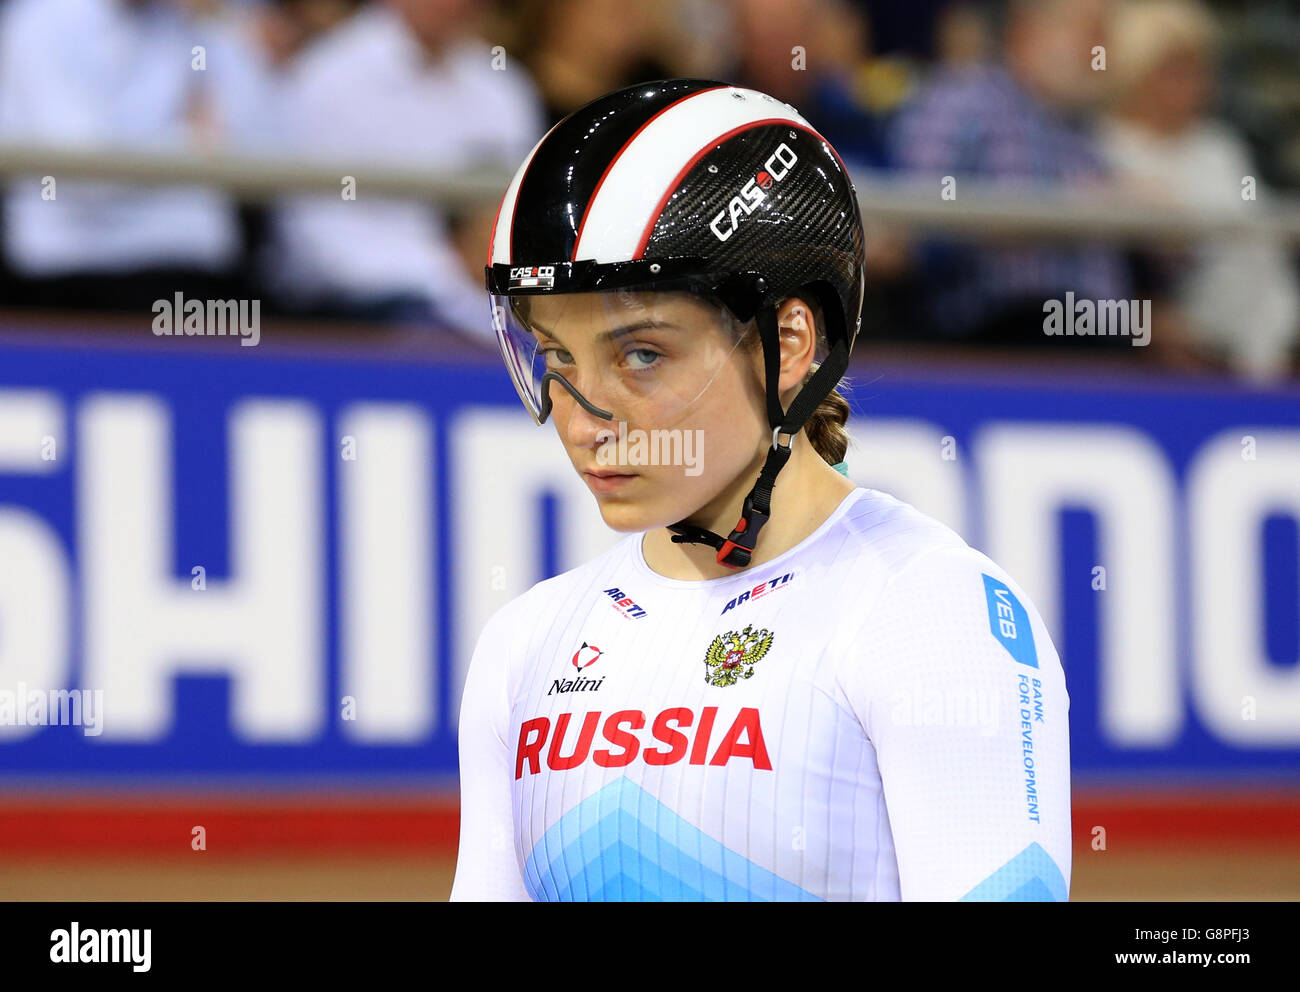 Russia's Daria Shmeleva competes in the Women's Team Sprint during day one of the UCI Track Cycling World Championships at Lee Valley VeloPark, London. Stock Photo